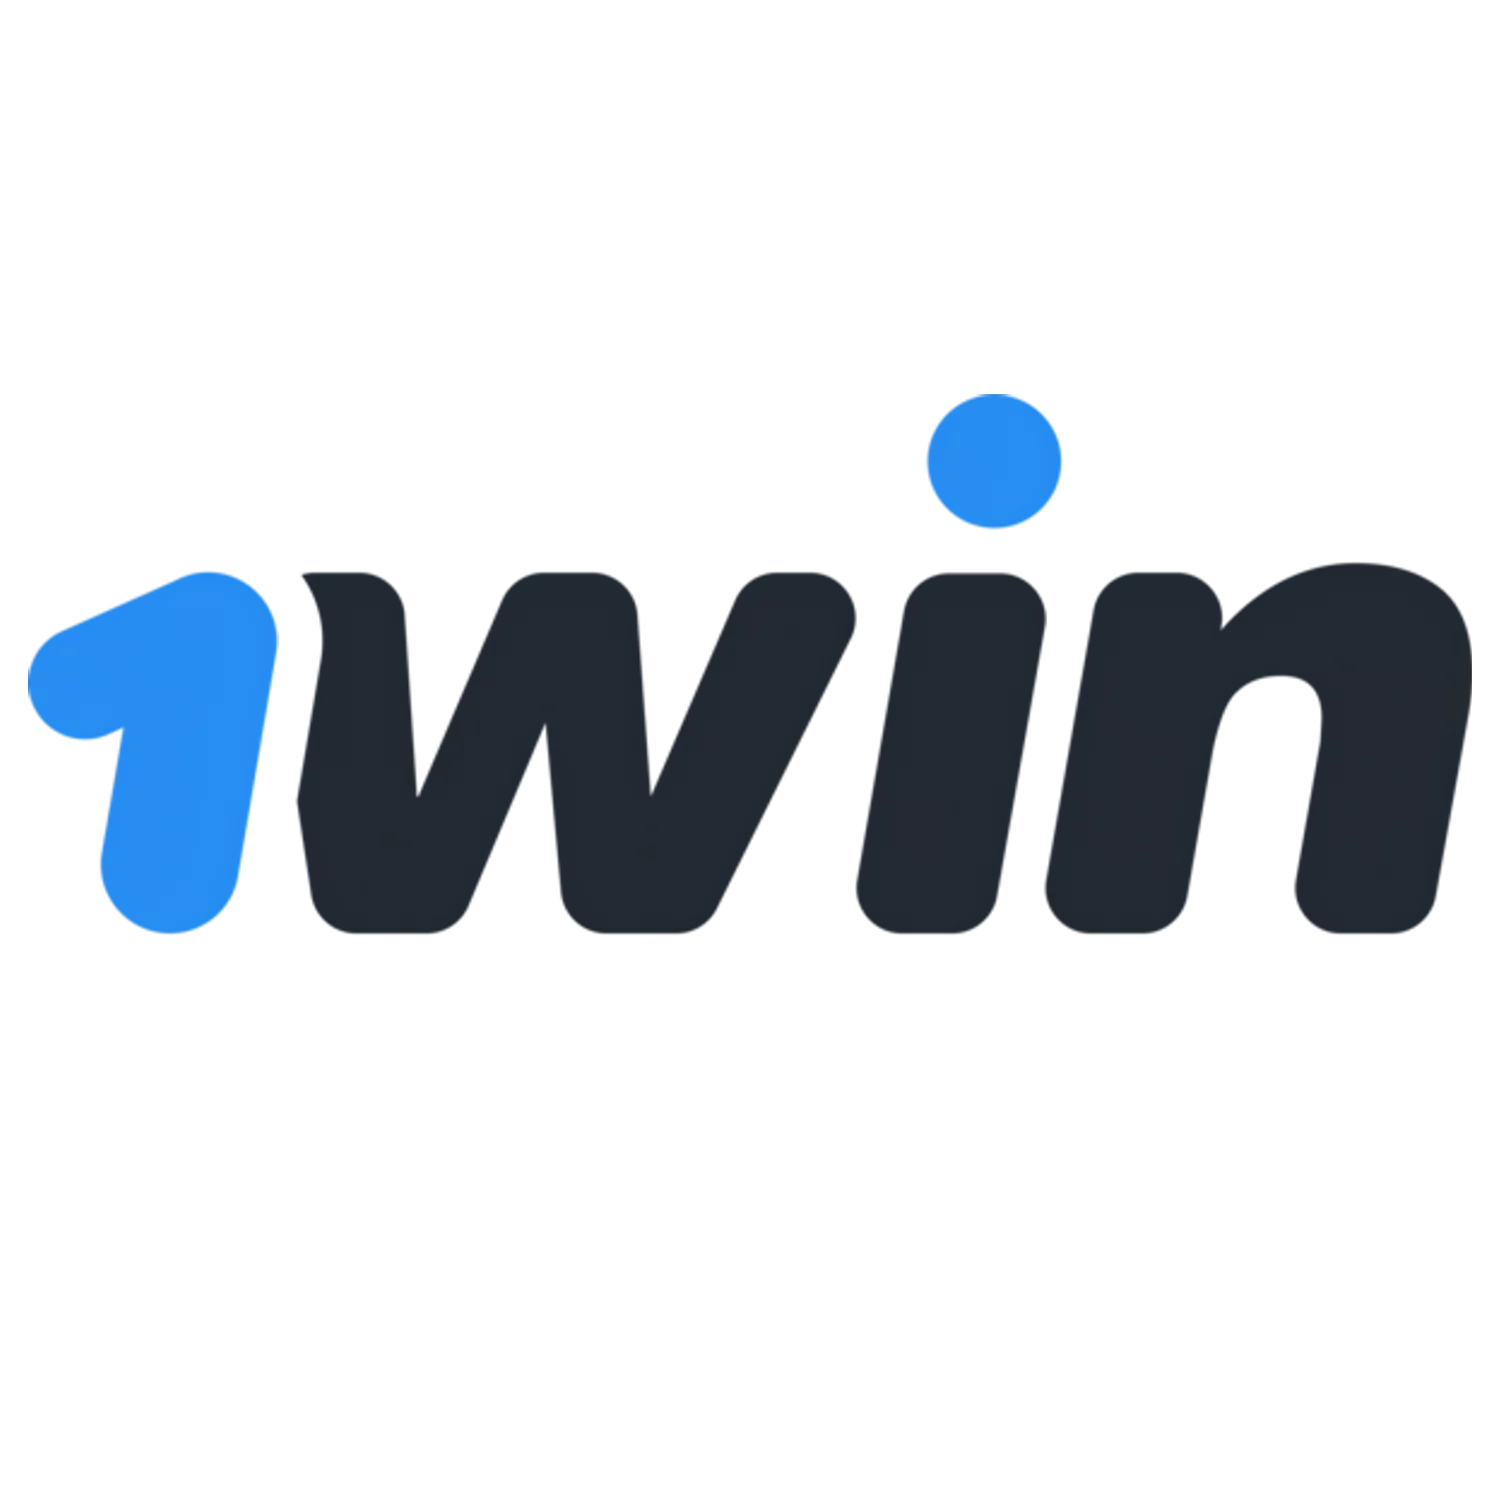 1win is the second most popular cricket betting site.